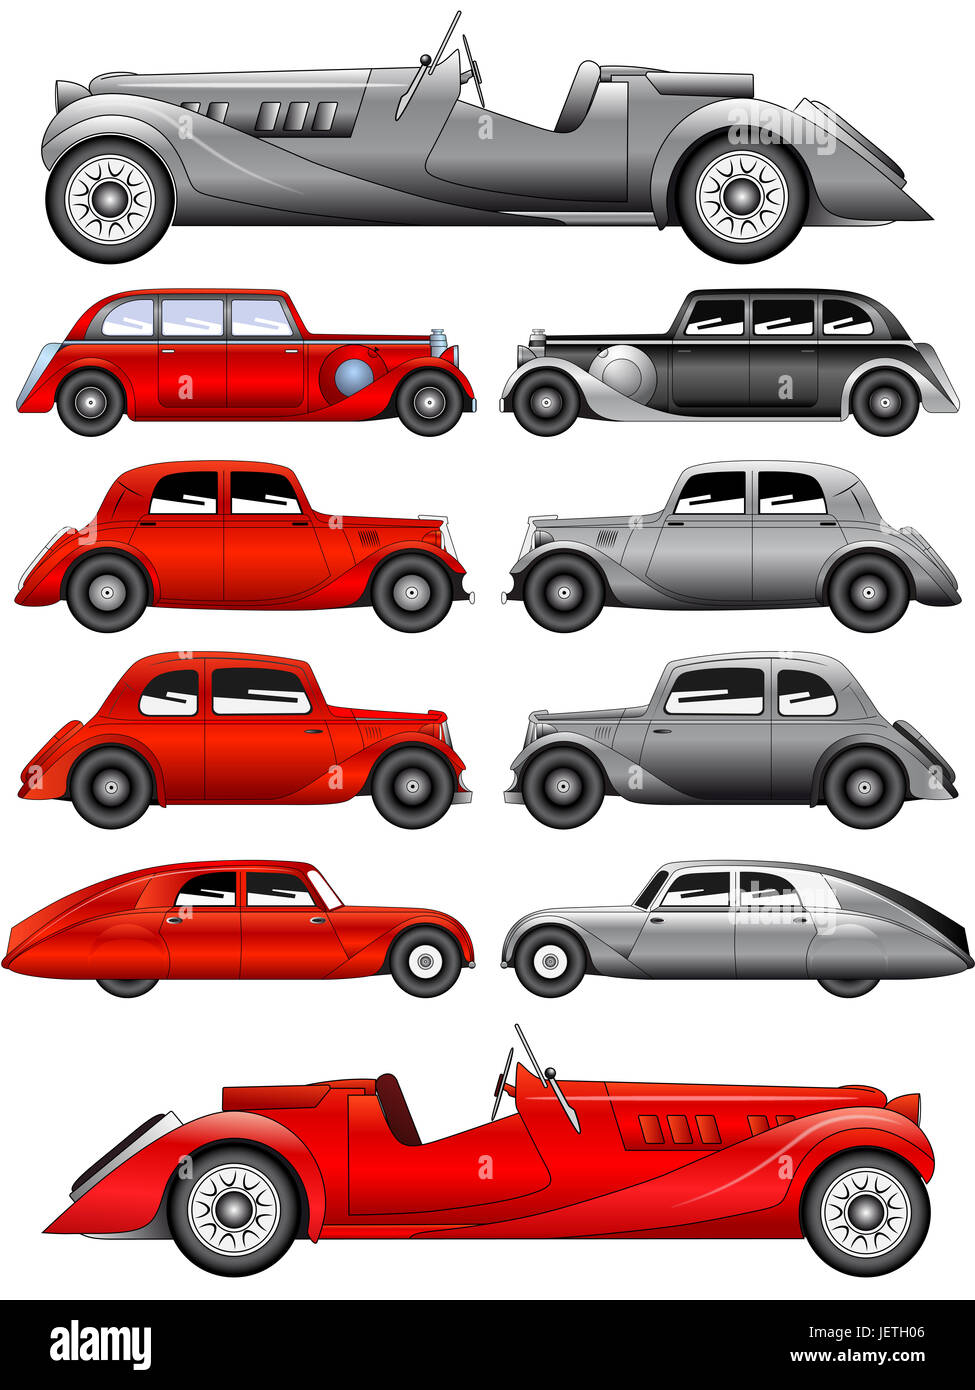 Vector illustration of the set of various vintage cars Stock Photo